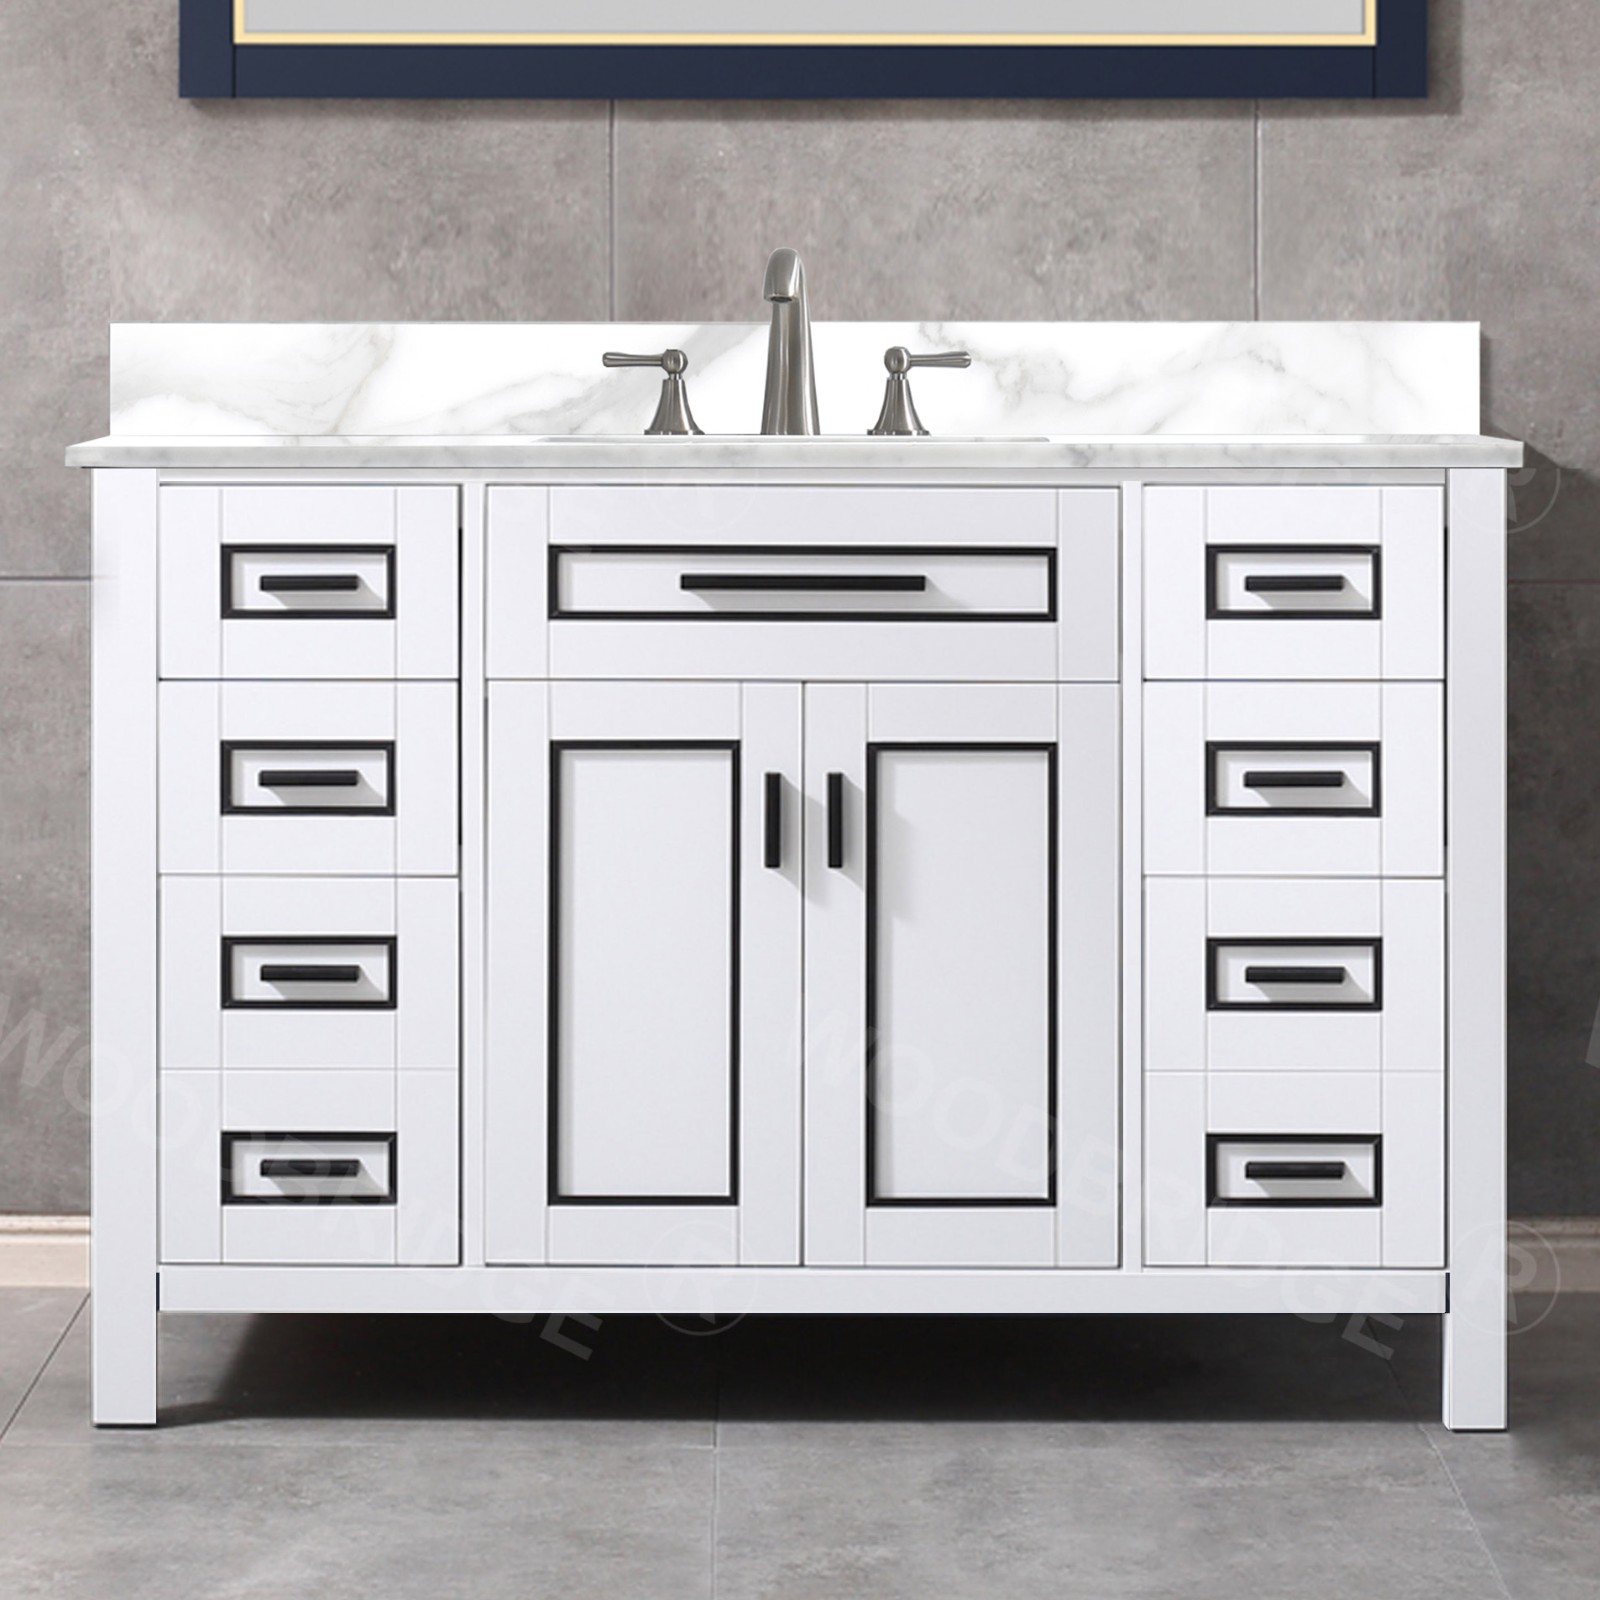  WOODBRIDGE Milan  49” Floor Mounted Single Basin Vanity Set with Solid Wood Cabinet in White and Engineered stone composite Vanity Top in Fish Belly White with Pre-installed Undermount Rectangle Bathroom Sink and Pre-Drilled 3-Hole for 4” Centerset Faucet_4678